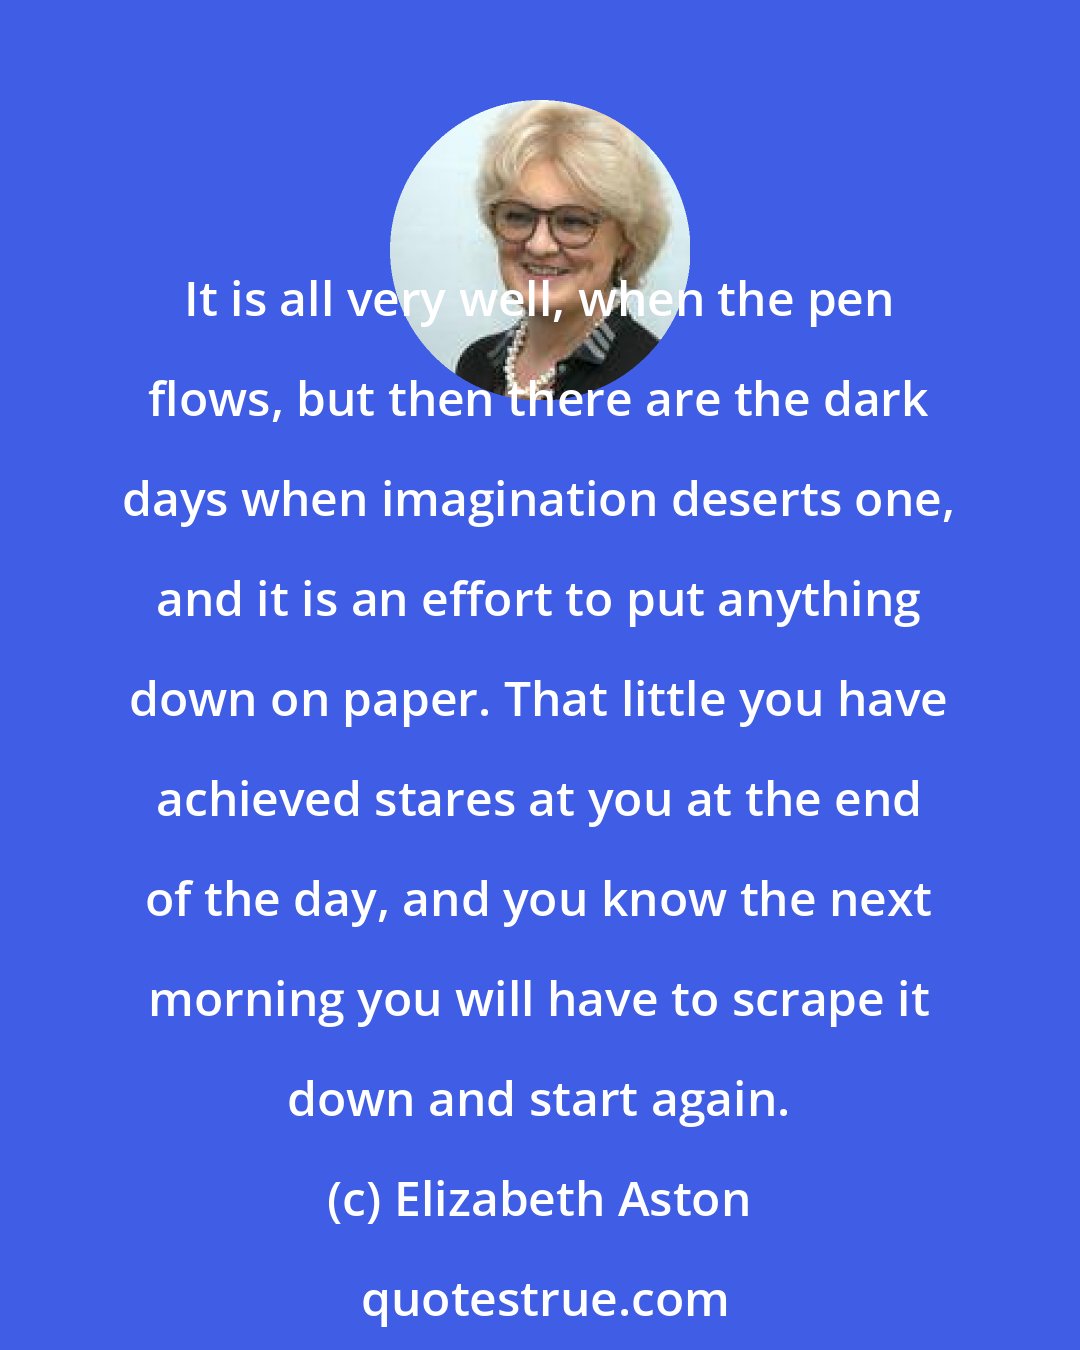 Elizabeth Aston: It is all very well, when the pen flows, but then there are the dark days when imagination deserts one, and it is an effort to put anything down on paper. That little you have achieved stares at you at the end of the day, and you know the next morning you will have to scrape it down and start again.